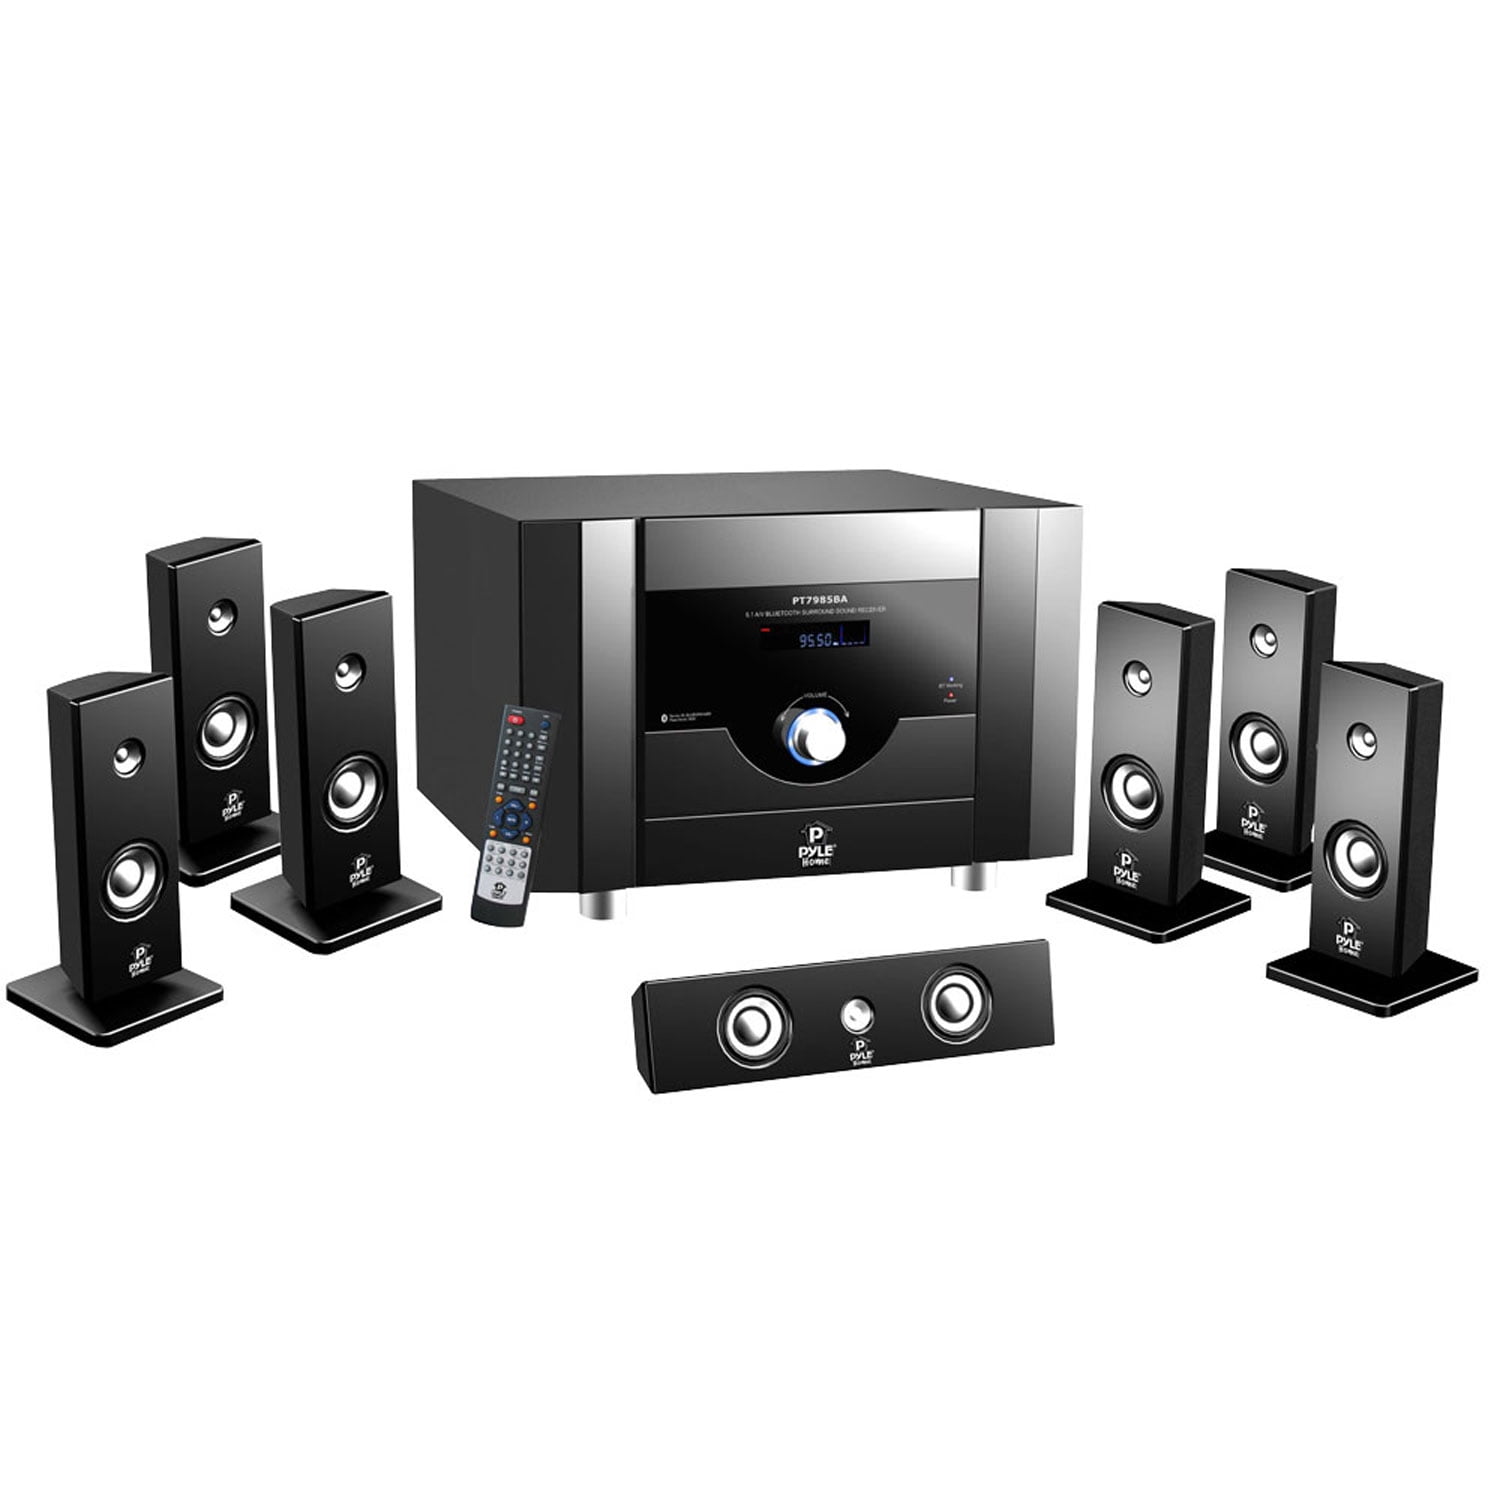 Pyle Channel Home Theater System with Satellite Speakers, Center Channel, Subwoofer, BT, FM Tuner - Walmart.com